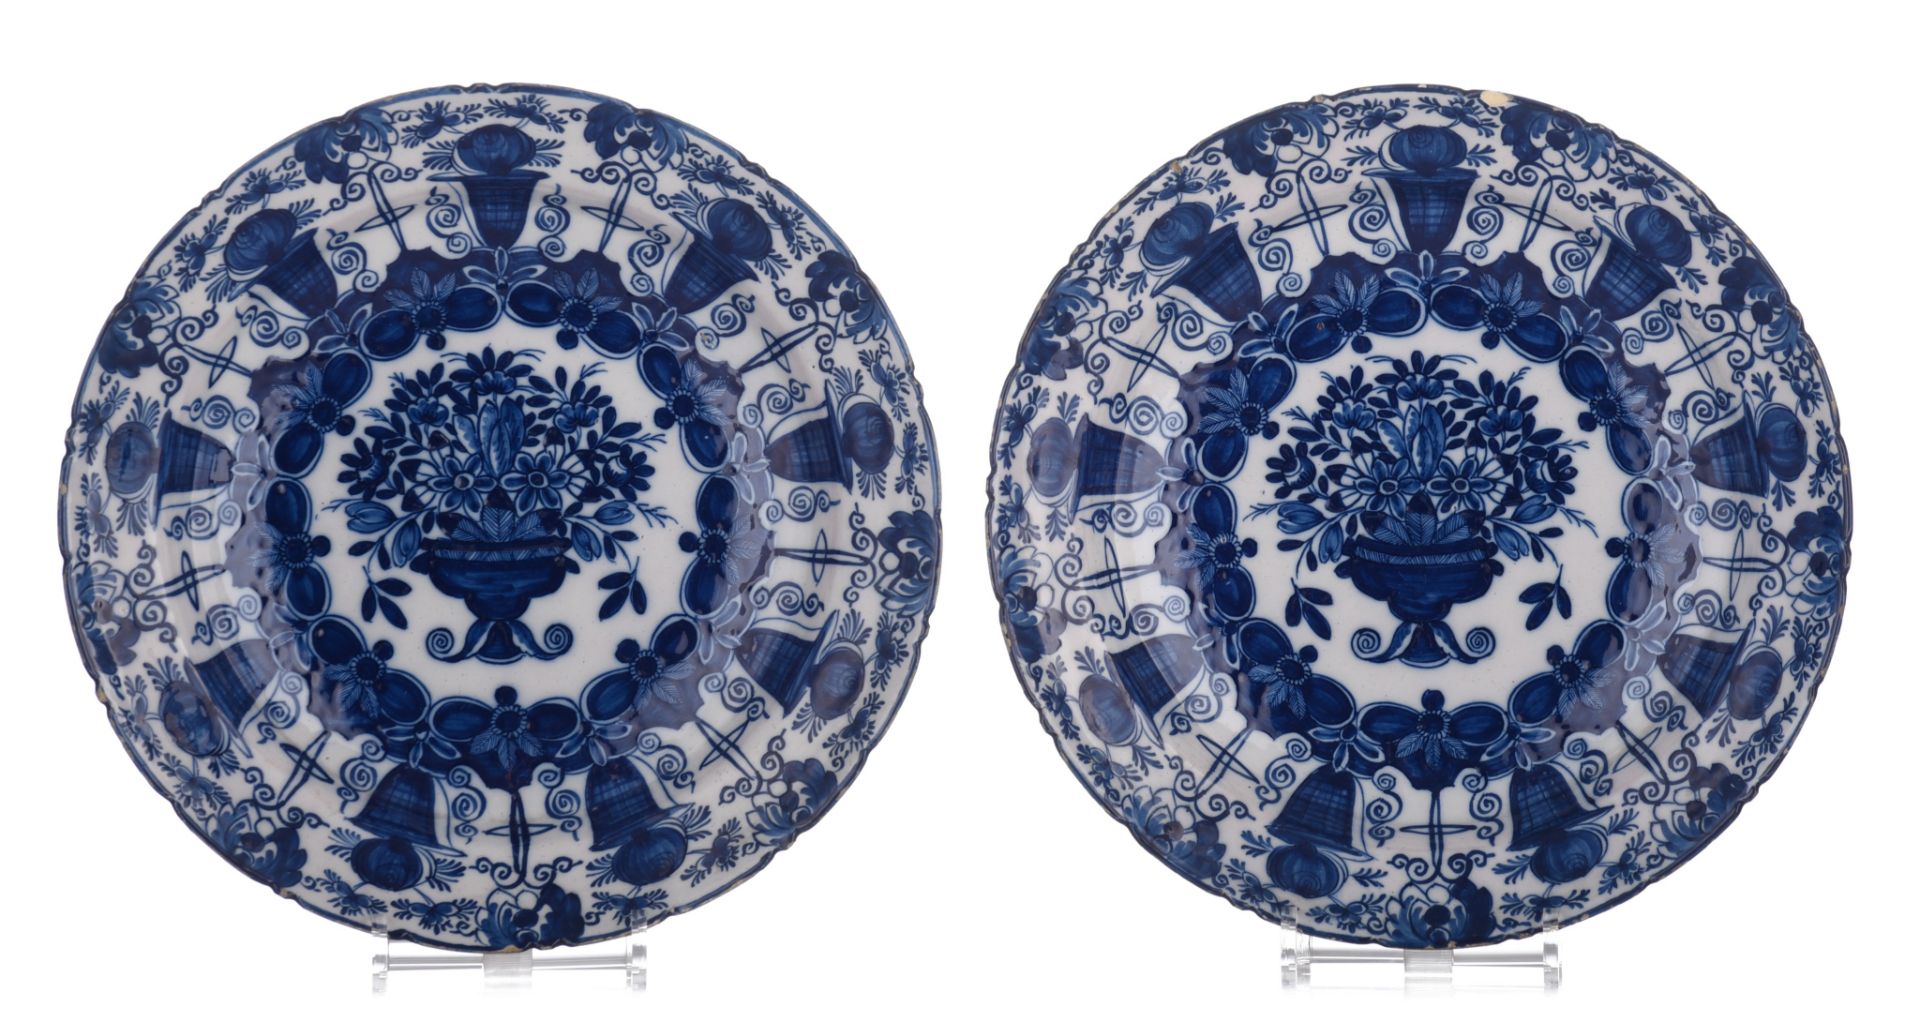 A collection of six Delft blue and white flower basket chargers, marked 'De Klauw', 18thC, ¯ 35 cm - Image 2 of 10